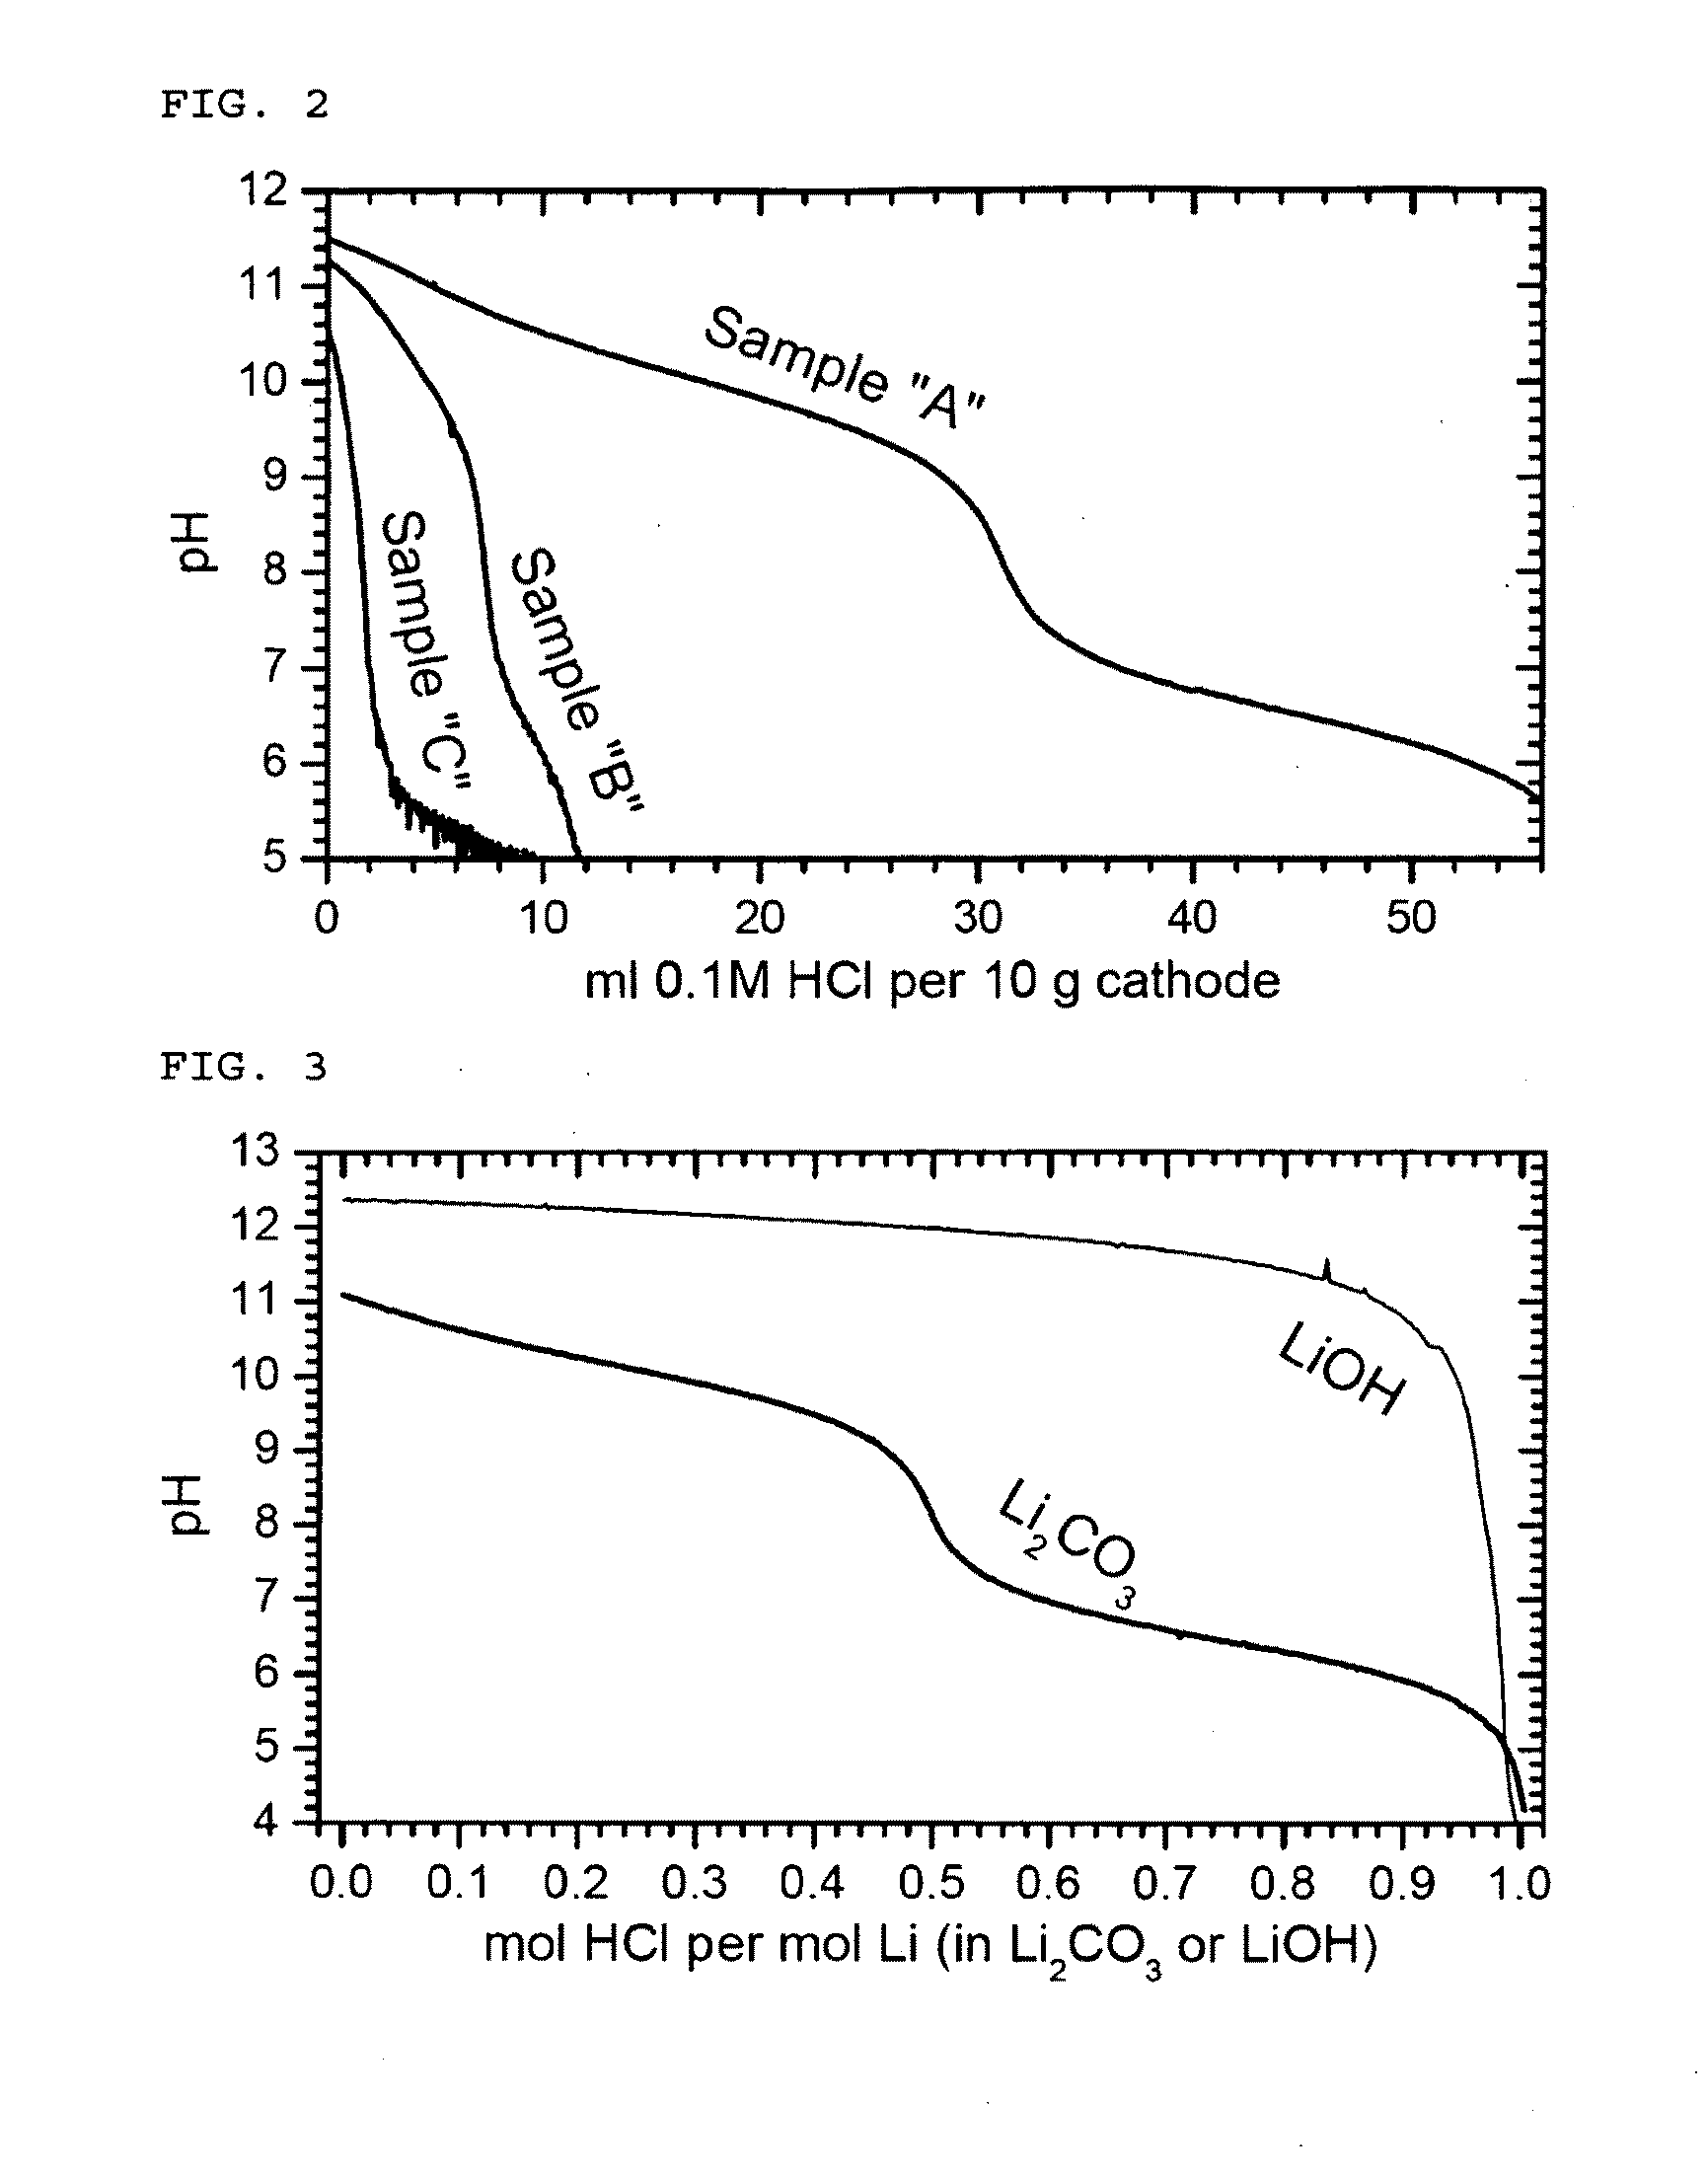 Process of making cathode material containing Ni-based lithium transition metal oxide